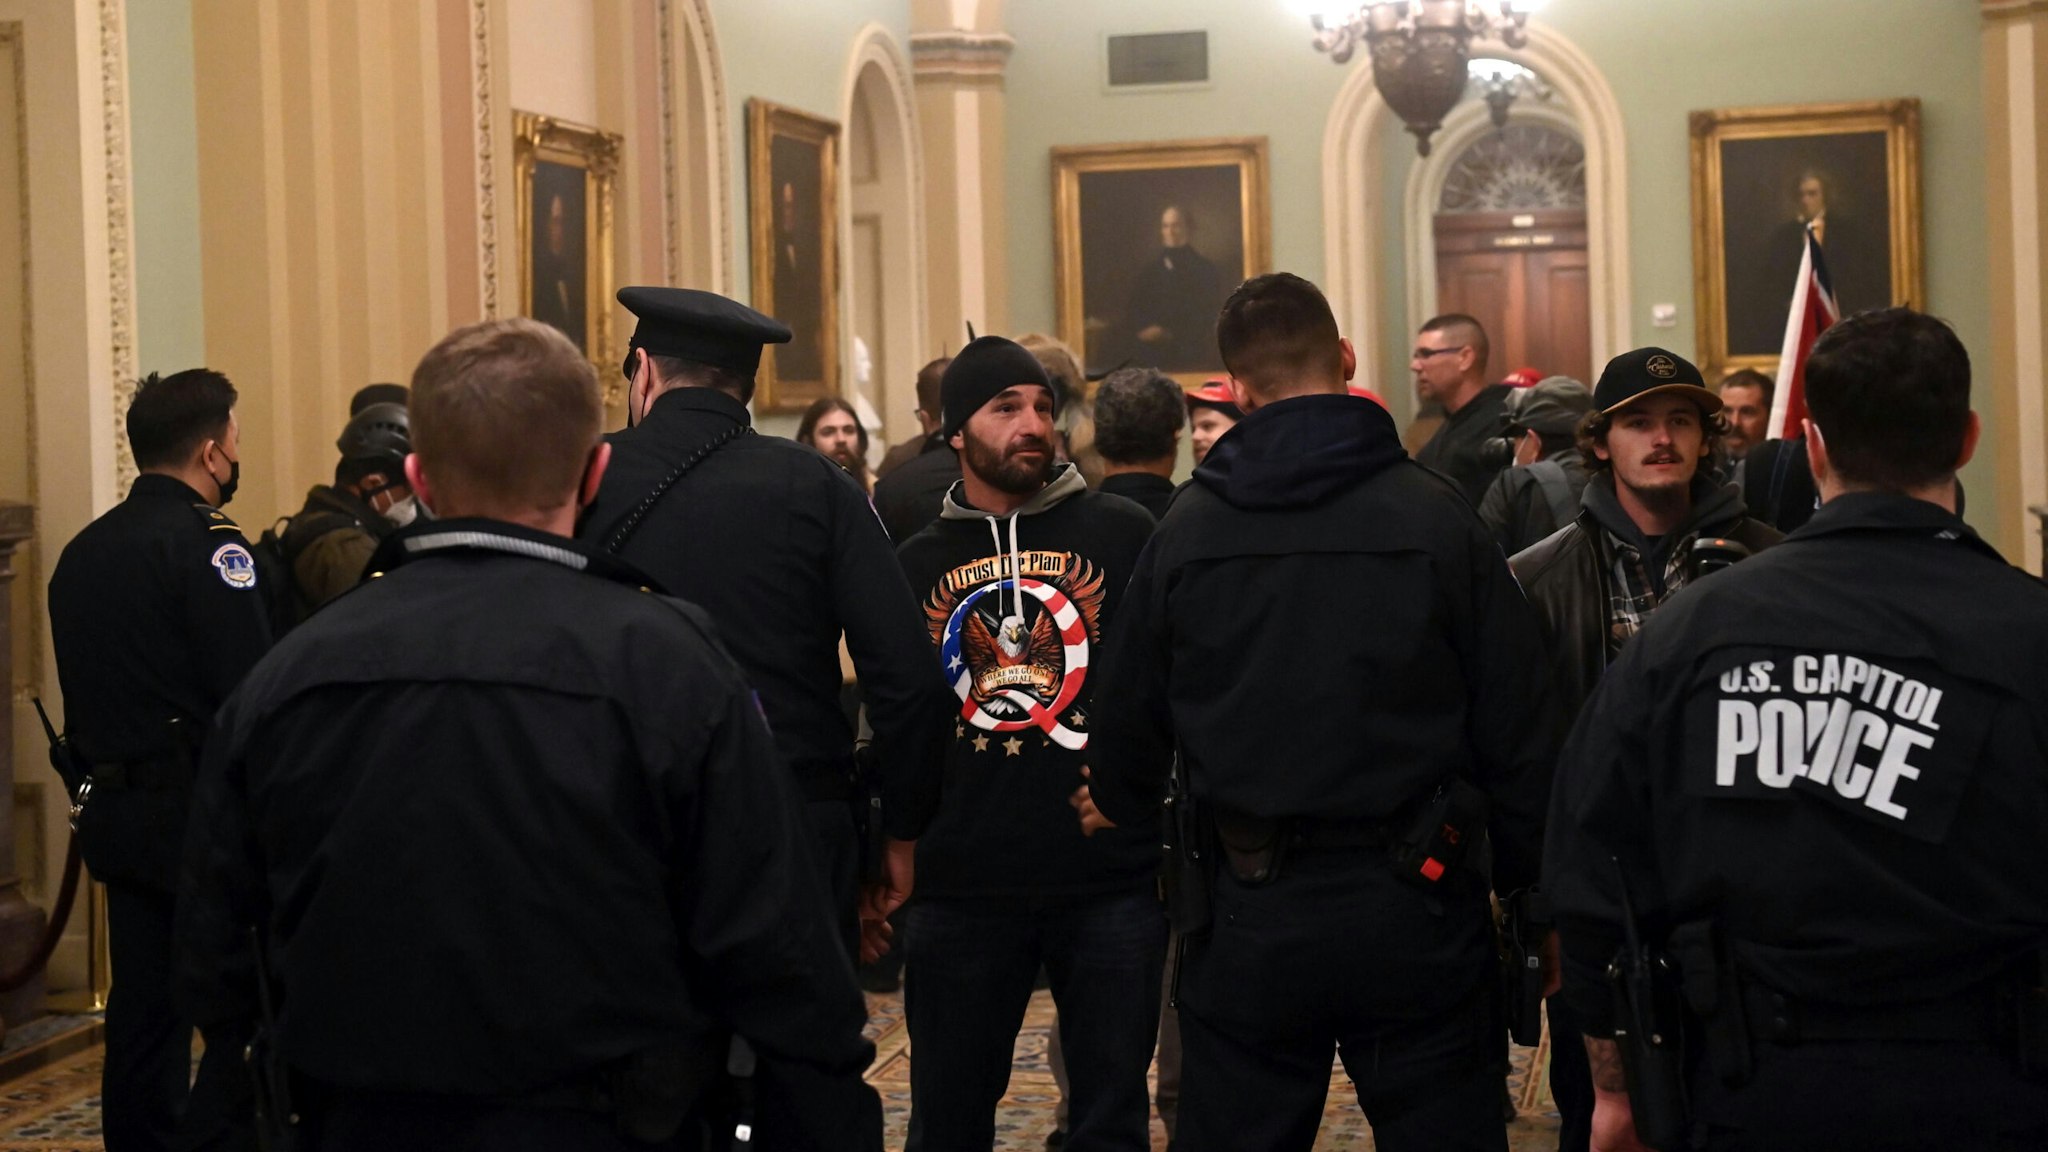 Supporters of US President Donald Trump enter the US Capitol on January 6, 2021, in Washington, DC. - Demonstrators breeched security and entered the Capitol as Congress debated the a 2020 presidential election Electoral Vote Certification.